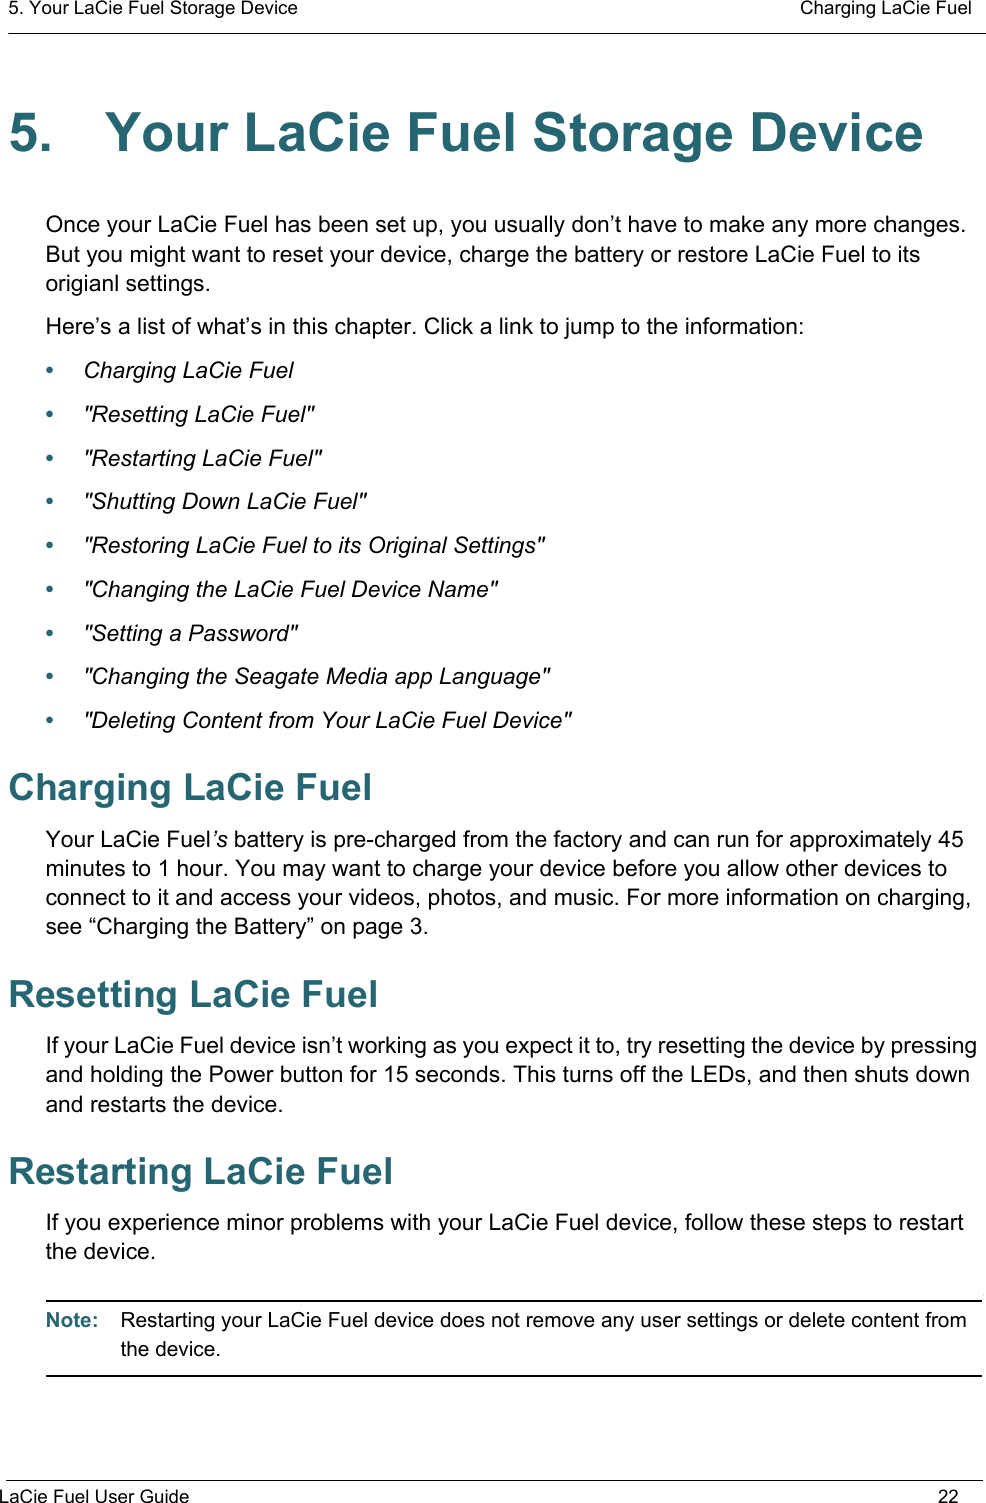 5. Your LaCie Fuel Storage Device  Charging LaCie FuelLaCie Fuel User Guide 225. Your LaCie Fuel Storage DeviceOnce your LaCie Fuel has been set up, you usually don’t have to make any more changes. But you might want to reset your device, charge the battery or restore LaCie Fuel to its origianl settings. Here’s a list of what’s in this chapter. Click a link to jump to the information:•Charging LaCie Fuel•&quot;Resetting LaCie Fuel&quot;•&quot;Restarting LaCie Fuel&quot;•&quot;Shutting Down LaCie Fuel&quot;•&quot;Restoring LaCie Fuel to its Original Settings&quot;•&quot;Changing the LaCie Fuel Device Name&quot;•&quot;Setting a Password&quot;•&quot;Changing the Seagate Media app Language&quot;•&quot;Deleting Content from Your LaCie Fuel Device&quot;Charging LaCie FuelYour LaCie Fuel’s battery is pre-charged from the factory and can run for approximately 45 minutes to 1 hour. You may want to charge your device before you allow other devices to connect to it and access your videos, photos, and music. For more information on charging, see “Charging the Battery” on page 3.Resetting LaCie FuelIf your LaCie Fuel device isn’t working as you expect it to, try resetting the device by pressing and holding the Power button for 15 seconds. This turns off the LEDs, and then shuts down and restarts the device.Restarting LaCie FuelIf you experience minor problems with your LaCie Fuel device, follow these steps to restart the device.Note:  Restarting your LaCie Fuel device does not remove any user settings or delete content from the device.